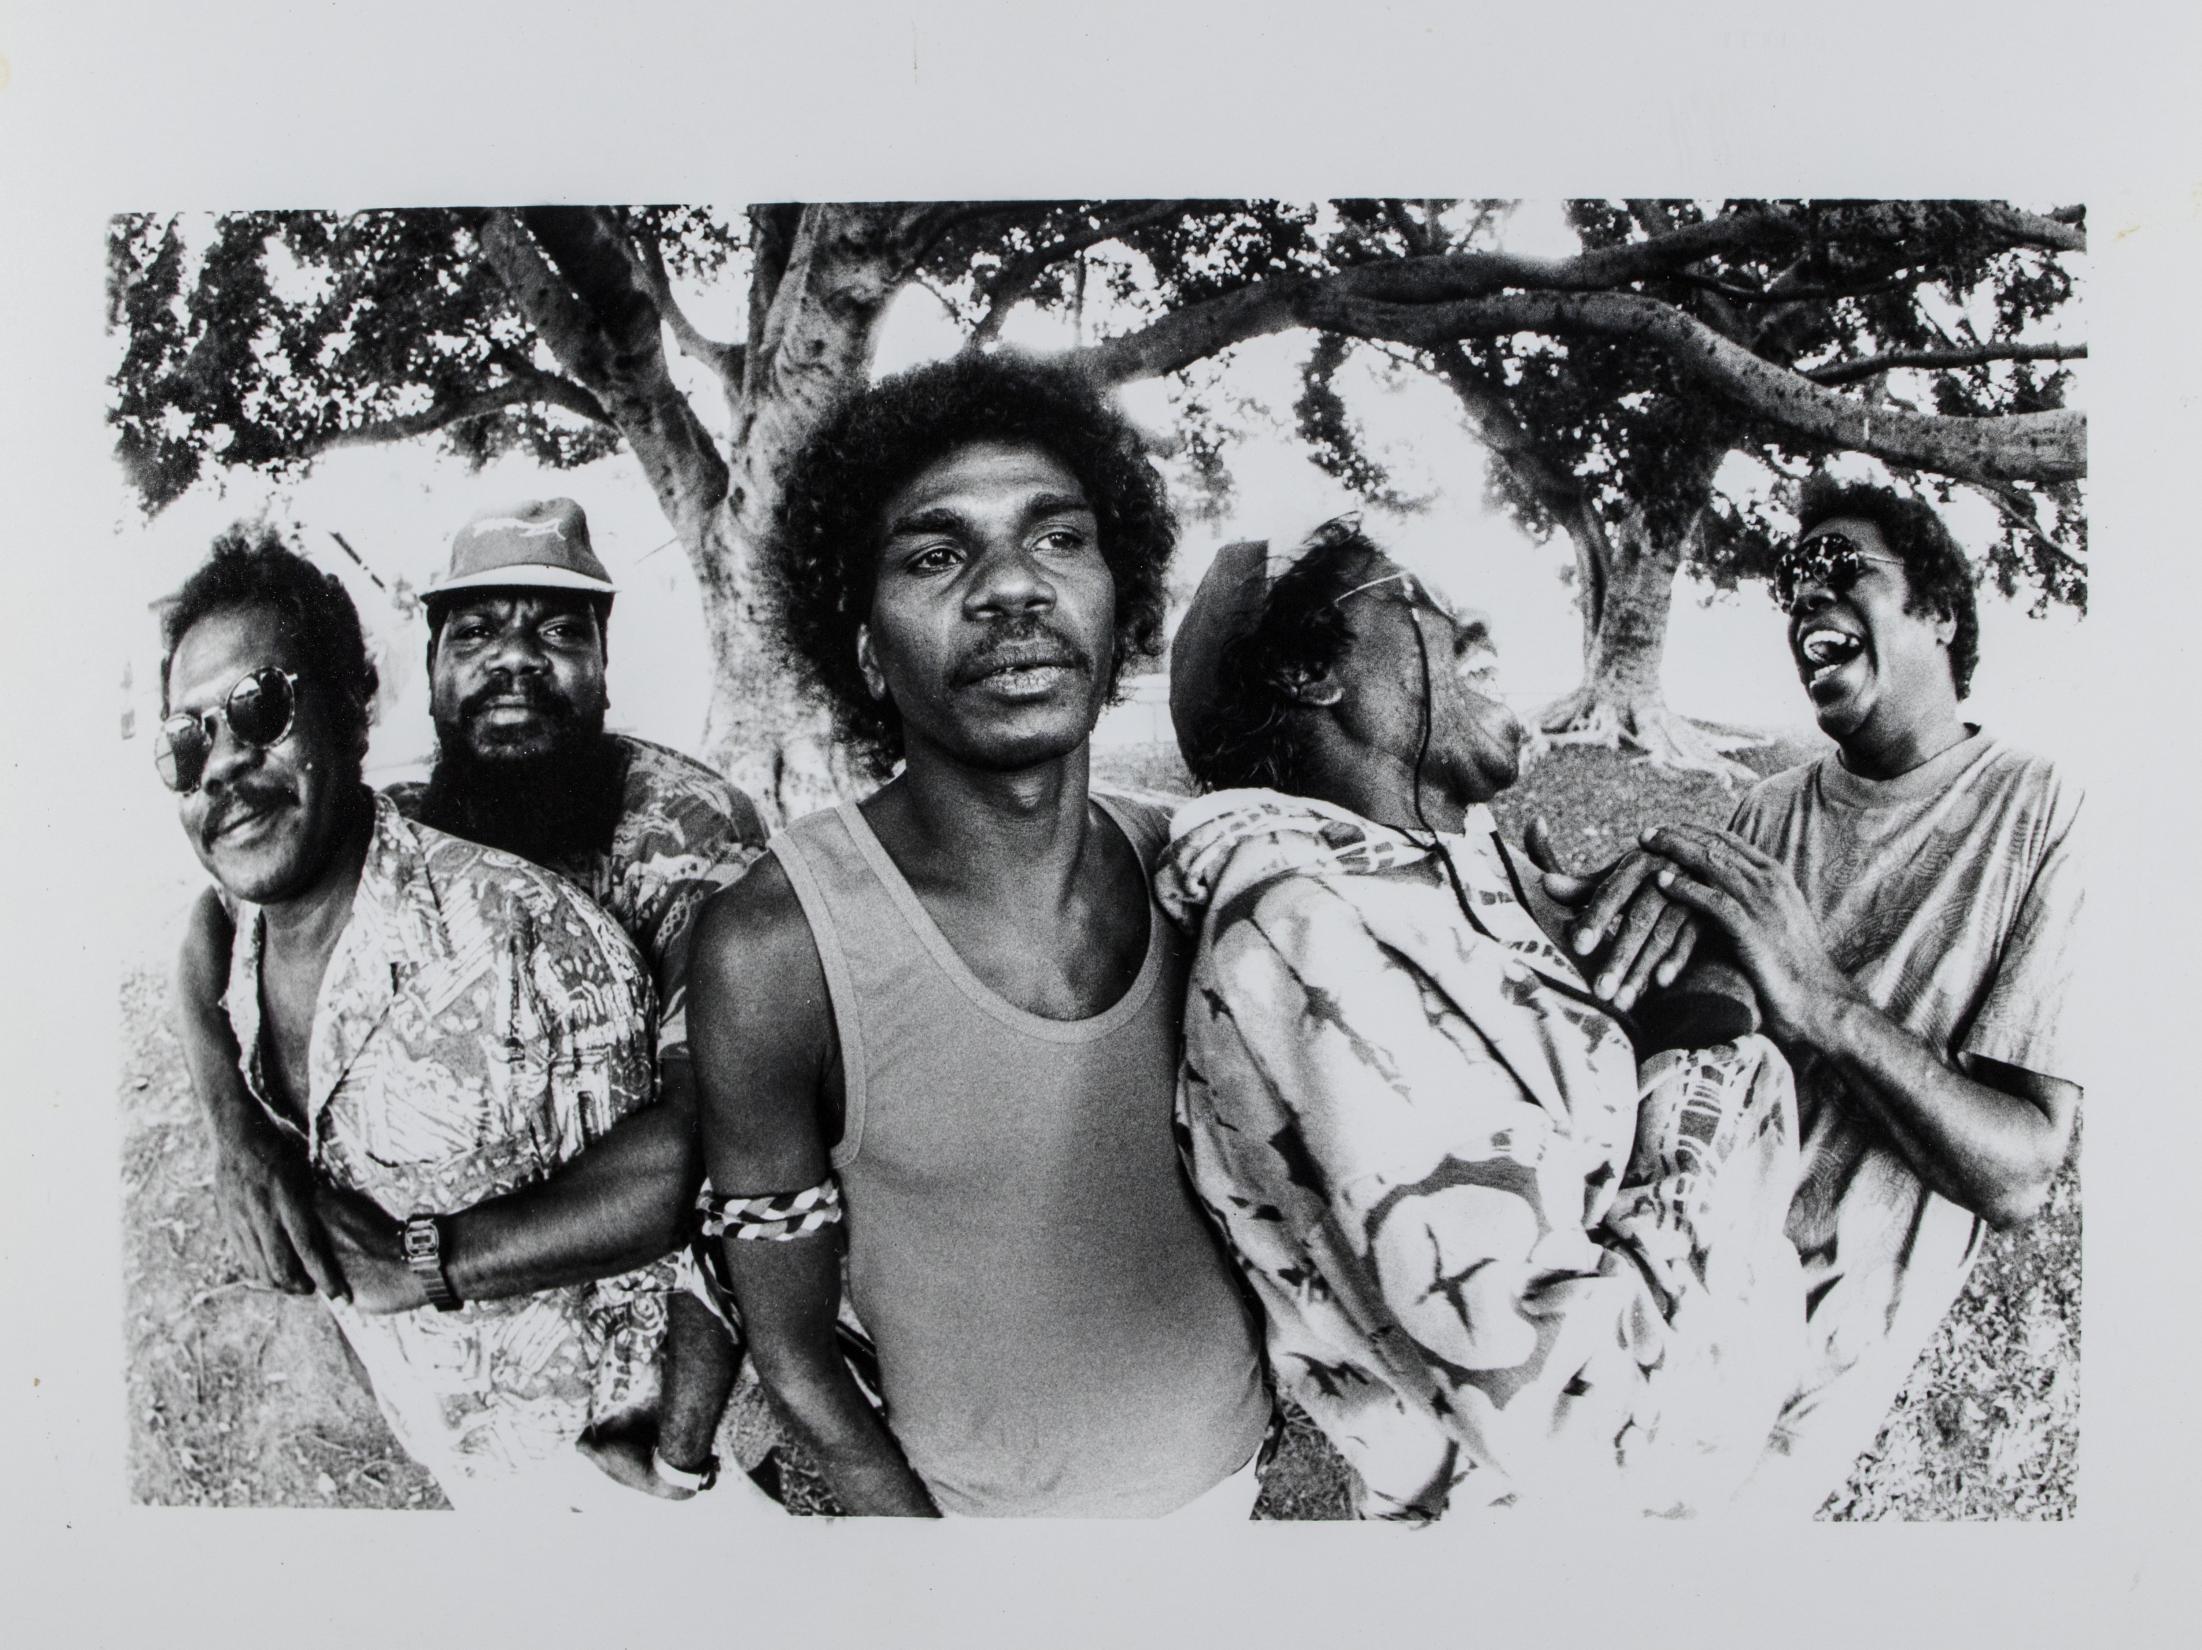 Black and white photograph of five men from Sunrize band posing for photo. Come men laughing others staring into the distance